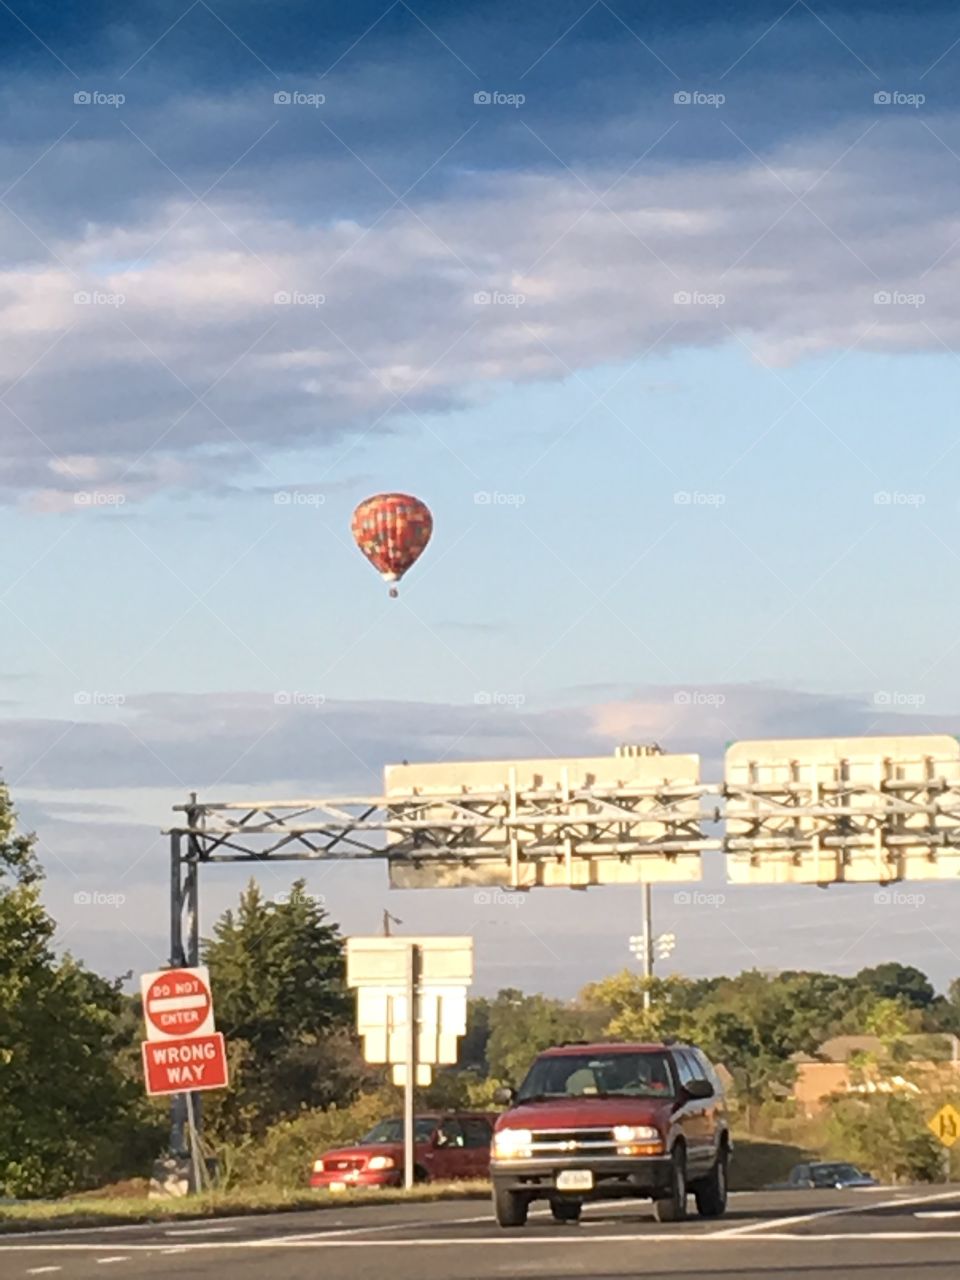 Hot air balloon in the city